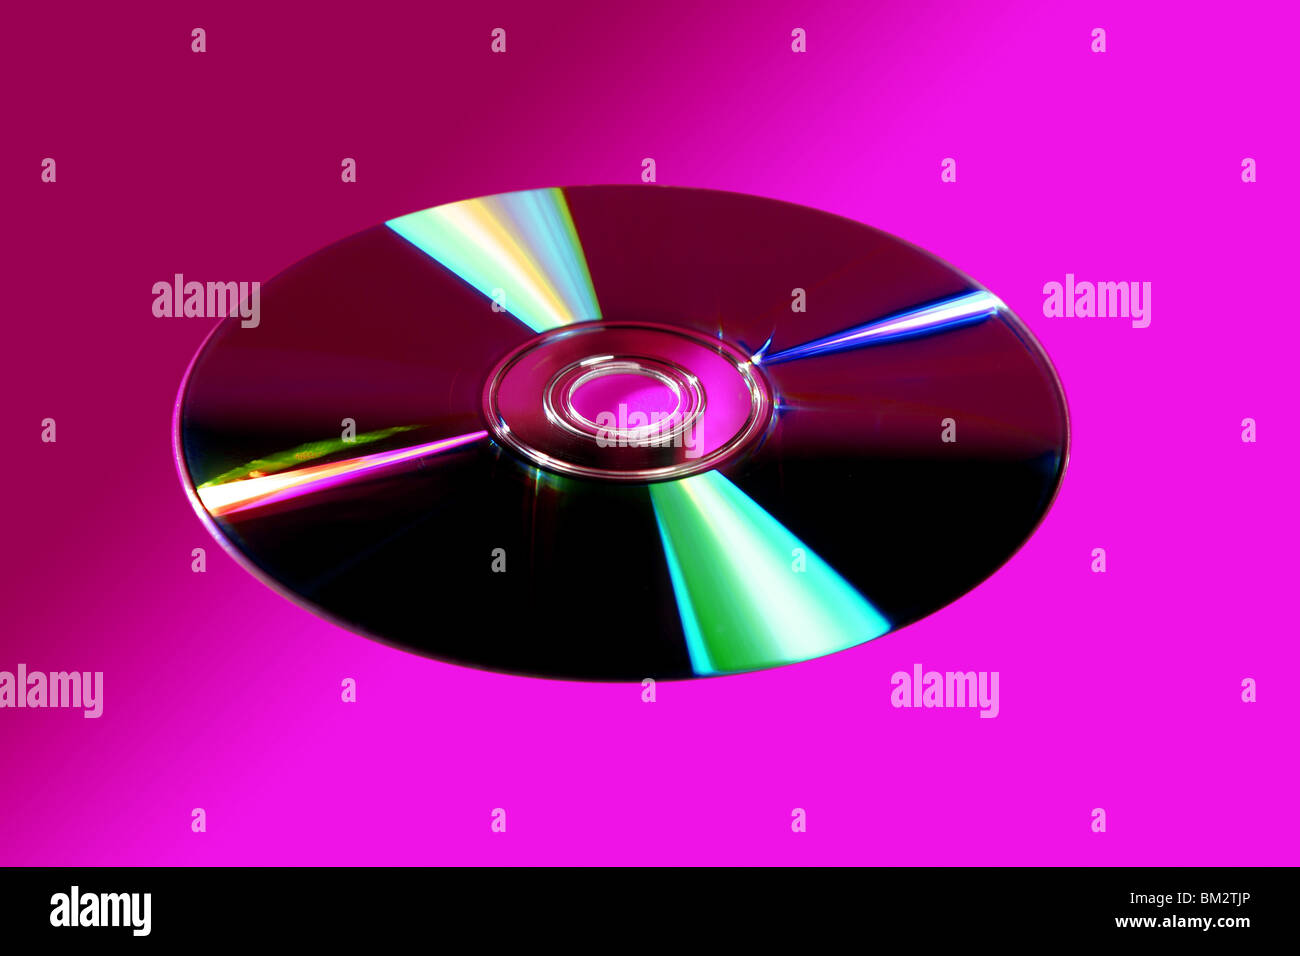 CD DVD disk with colorful reflexion over vivid pink background Stock Photo